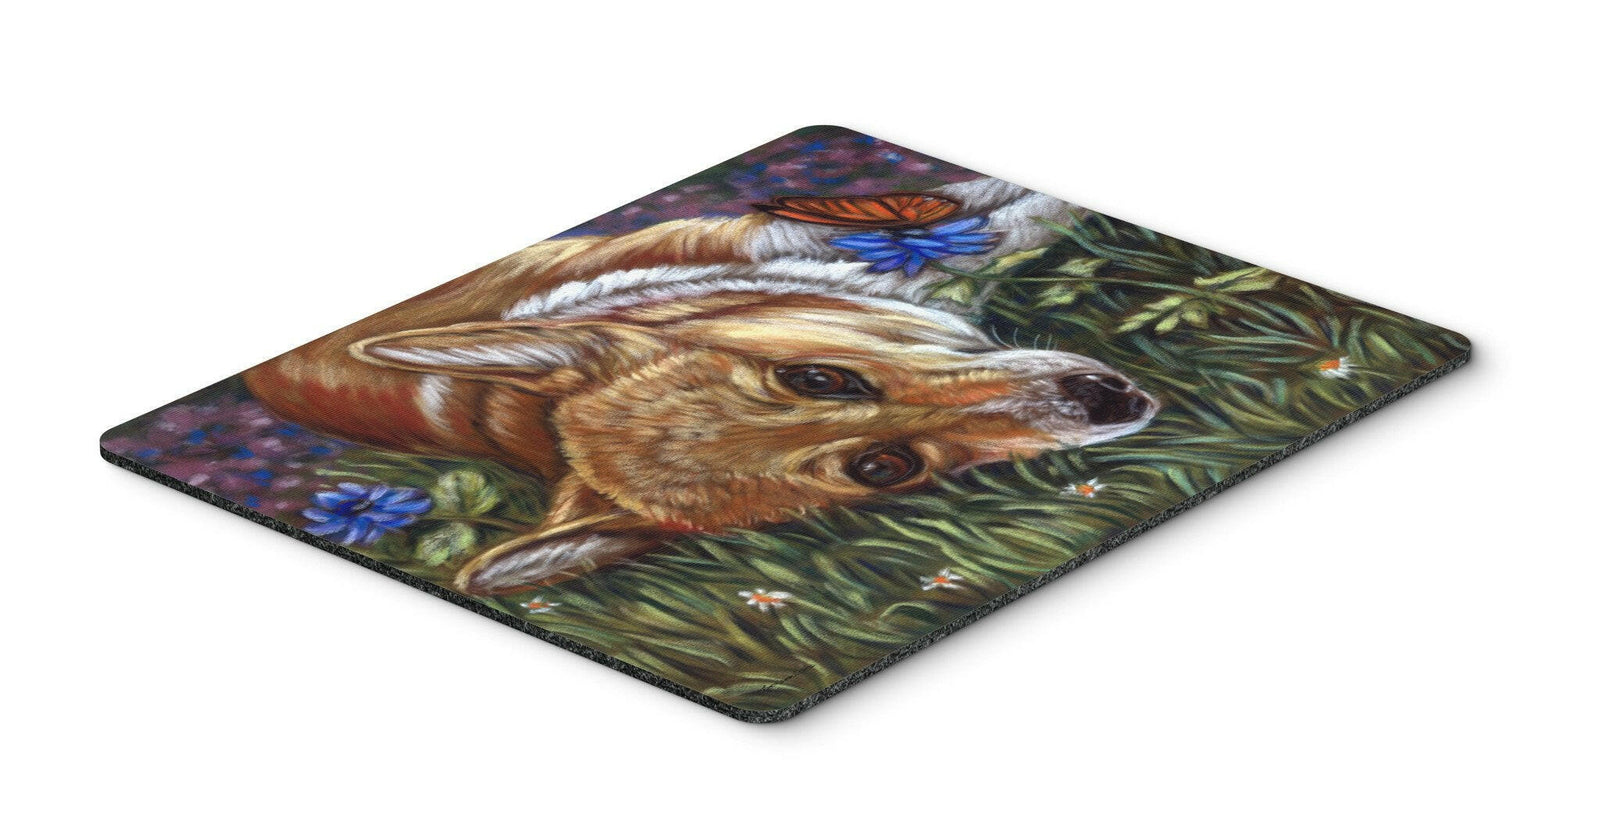 Corgi Pastel Butterfly Mouse Pad, Hot Pad or Trivet 7325MP by Caroline's Treasures